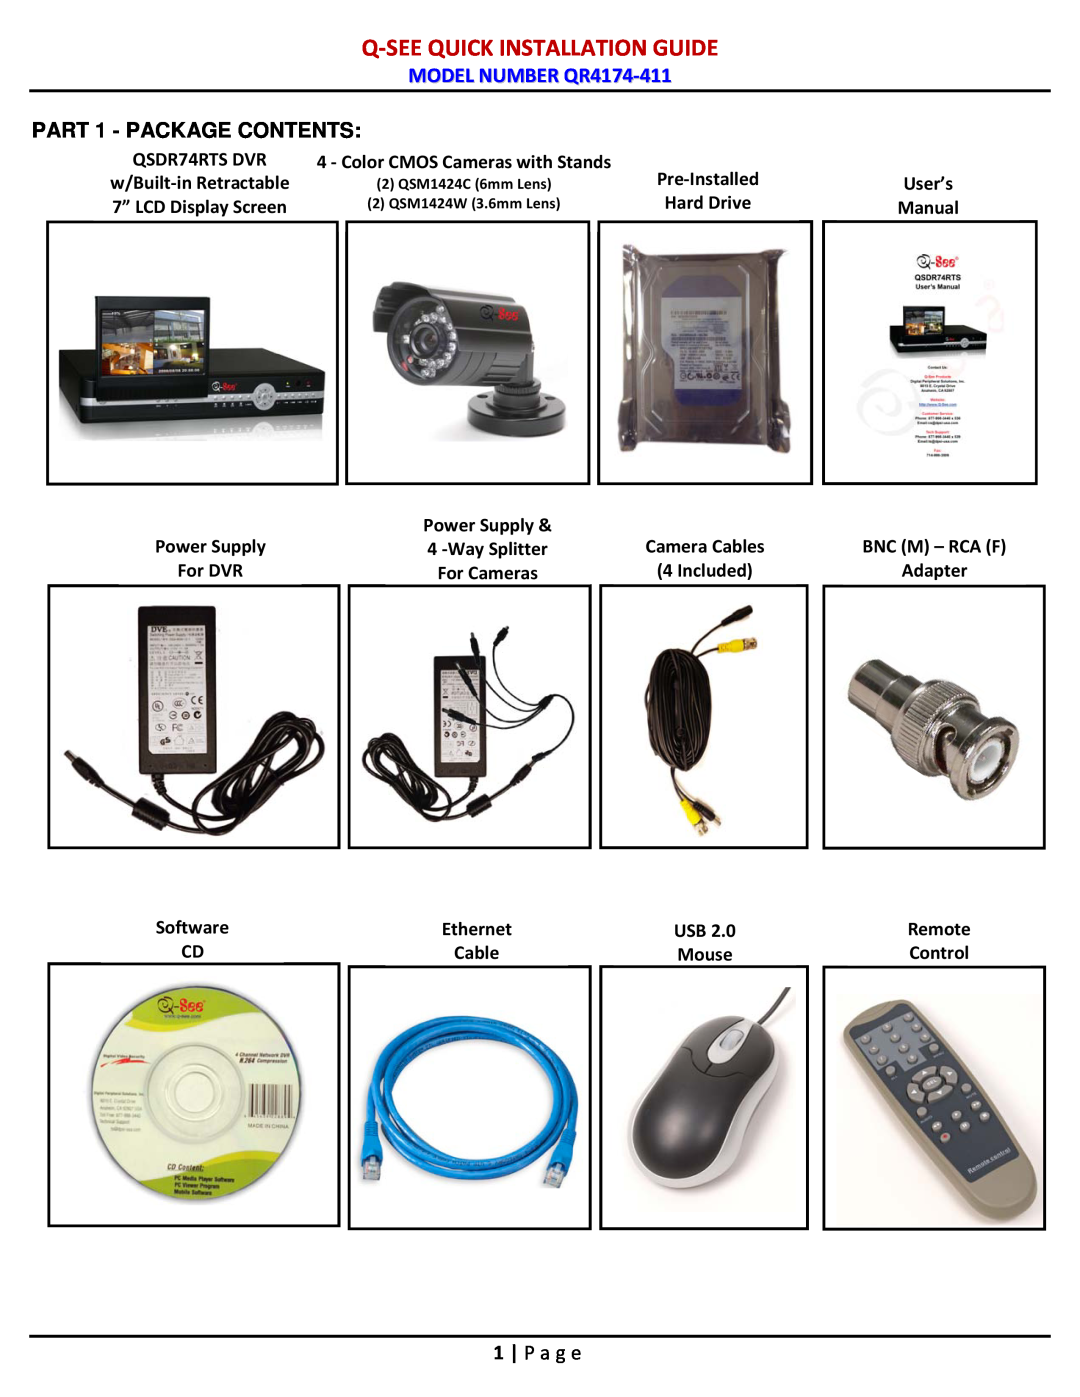 Q-See Q-Seequick Installation Guide, MODEL NUMBER QR4174-411, PART 1 - PACKAGE CONTENTS, P a g e, QSDR74RTS DVR, Remote 